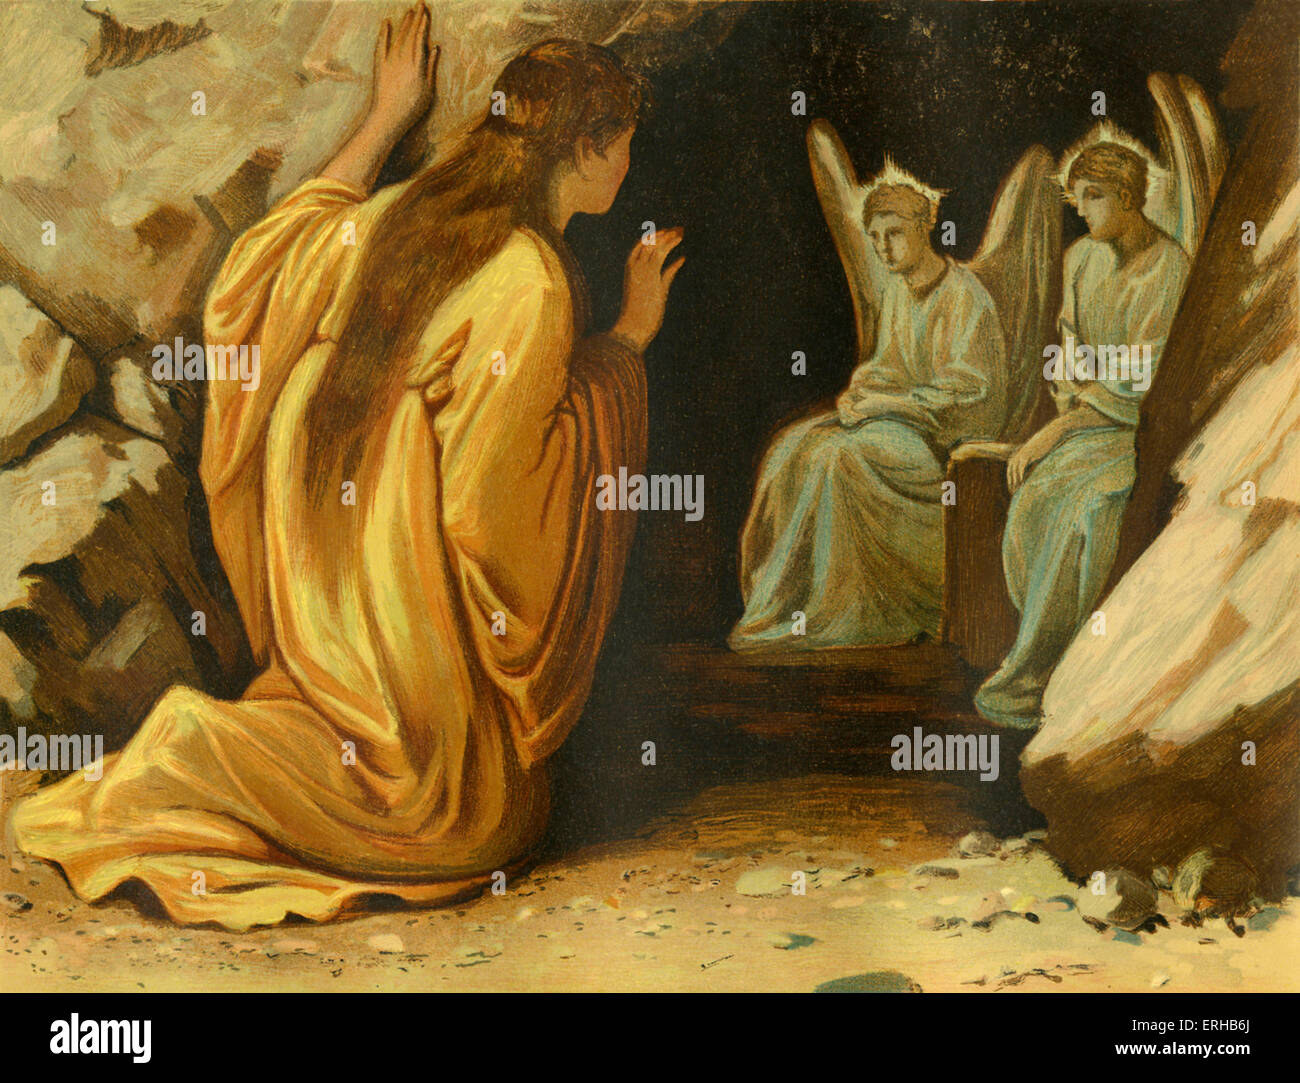 Mary Magdalene/ Mary of Magdala being informed of Christ's ressurection by angels at Jesus' tomb (Matthew 27:56).  Illustration Stock Photo